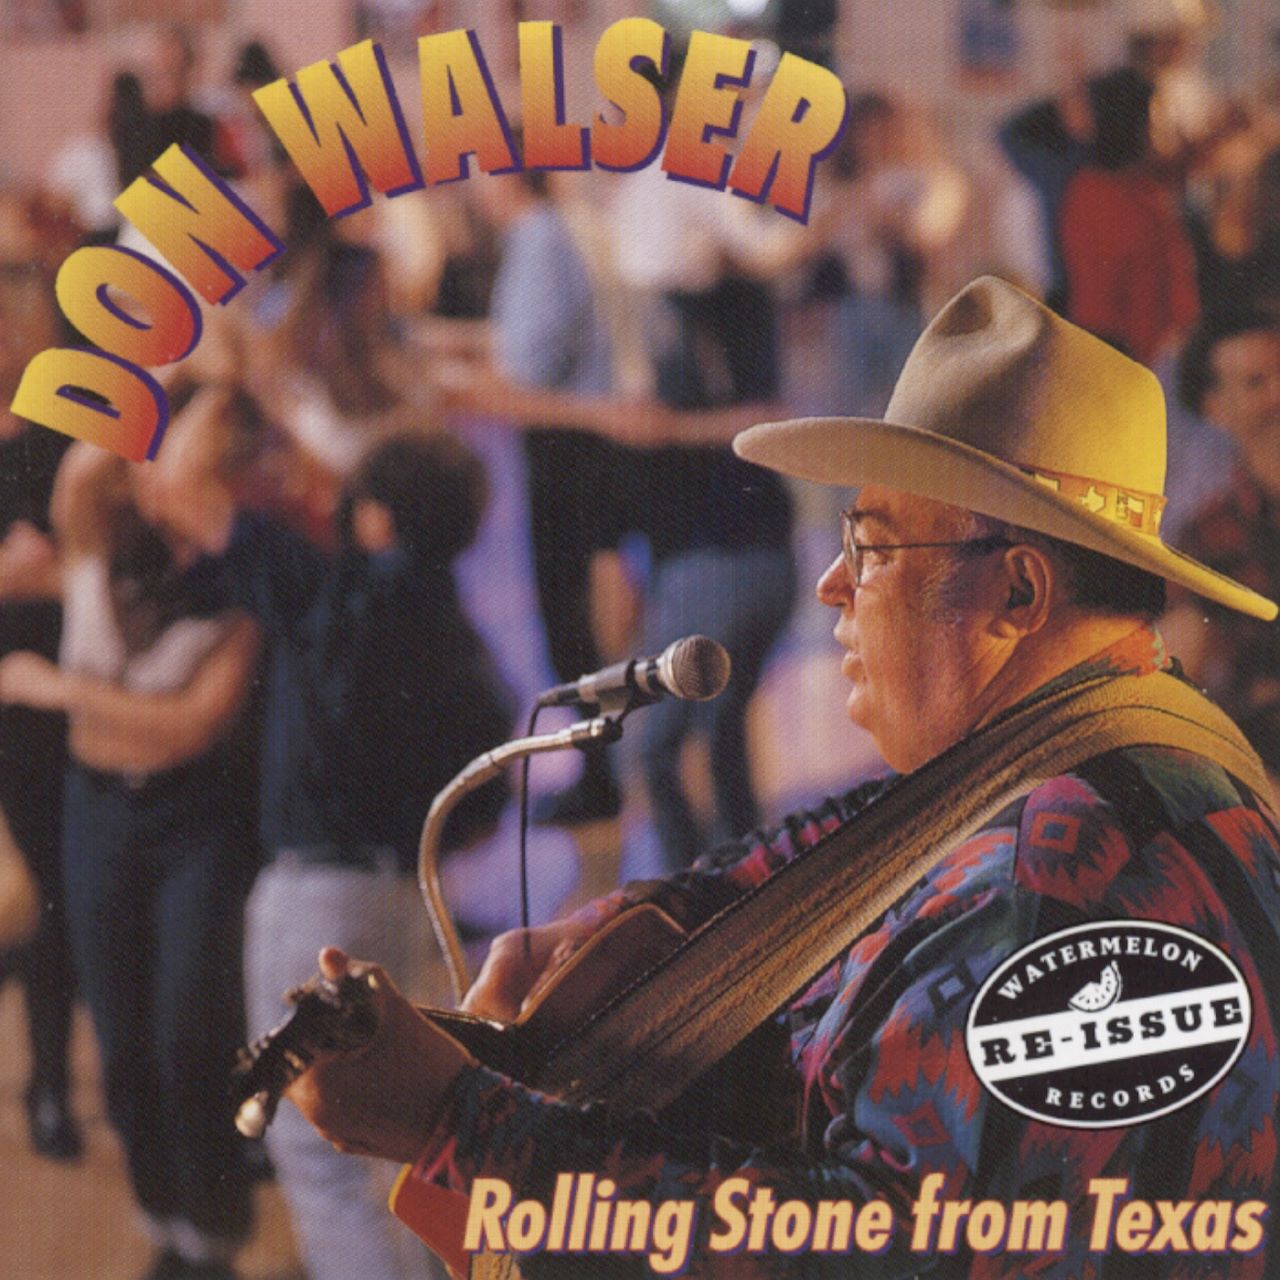 Don Walser - Rolling Stone From Texas cover album